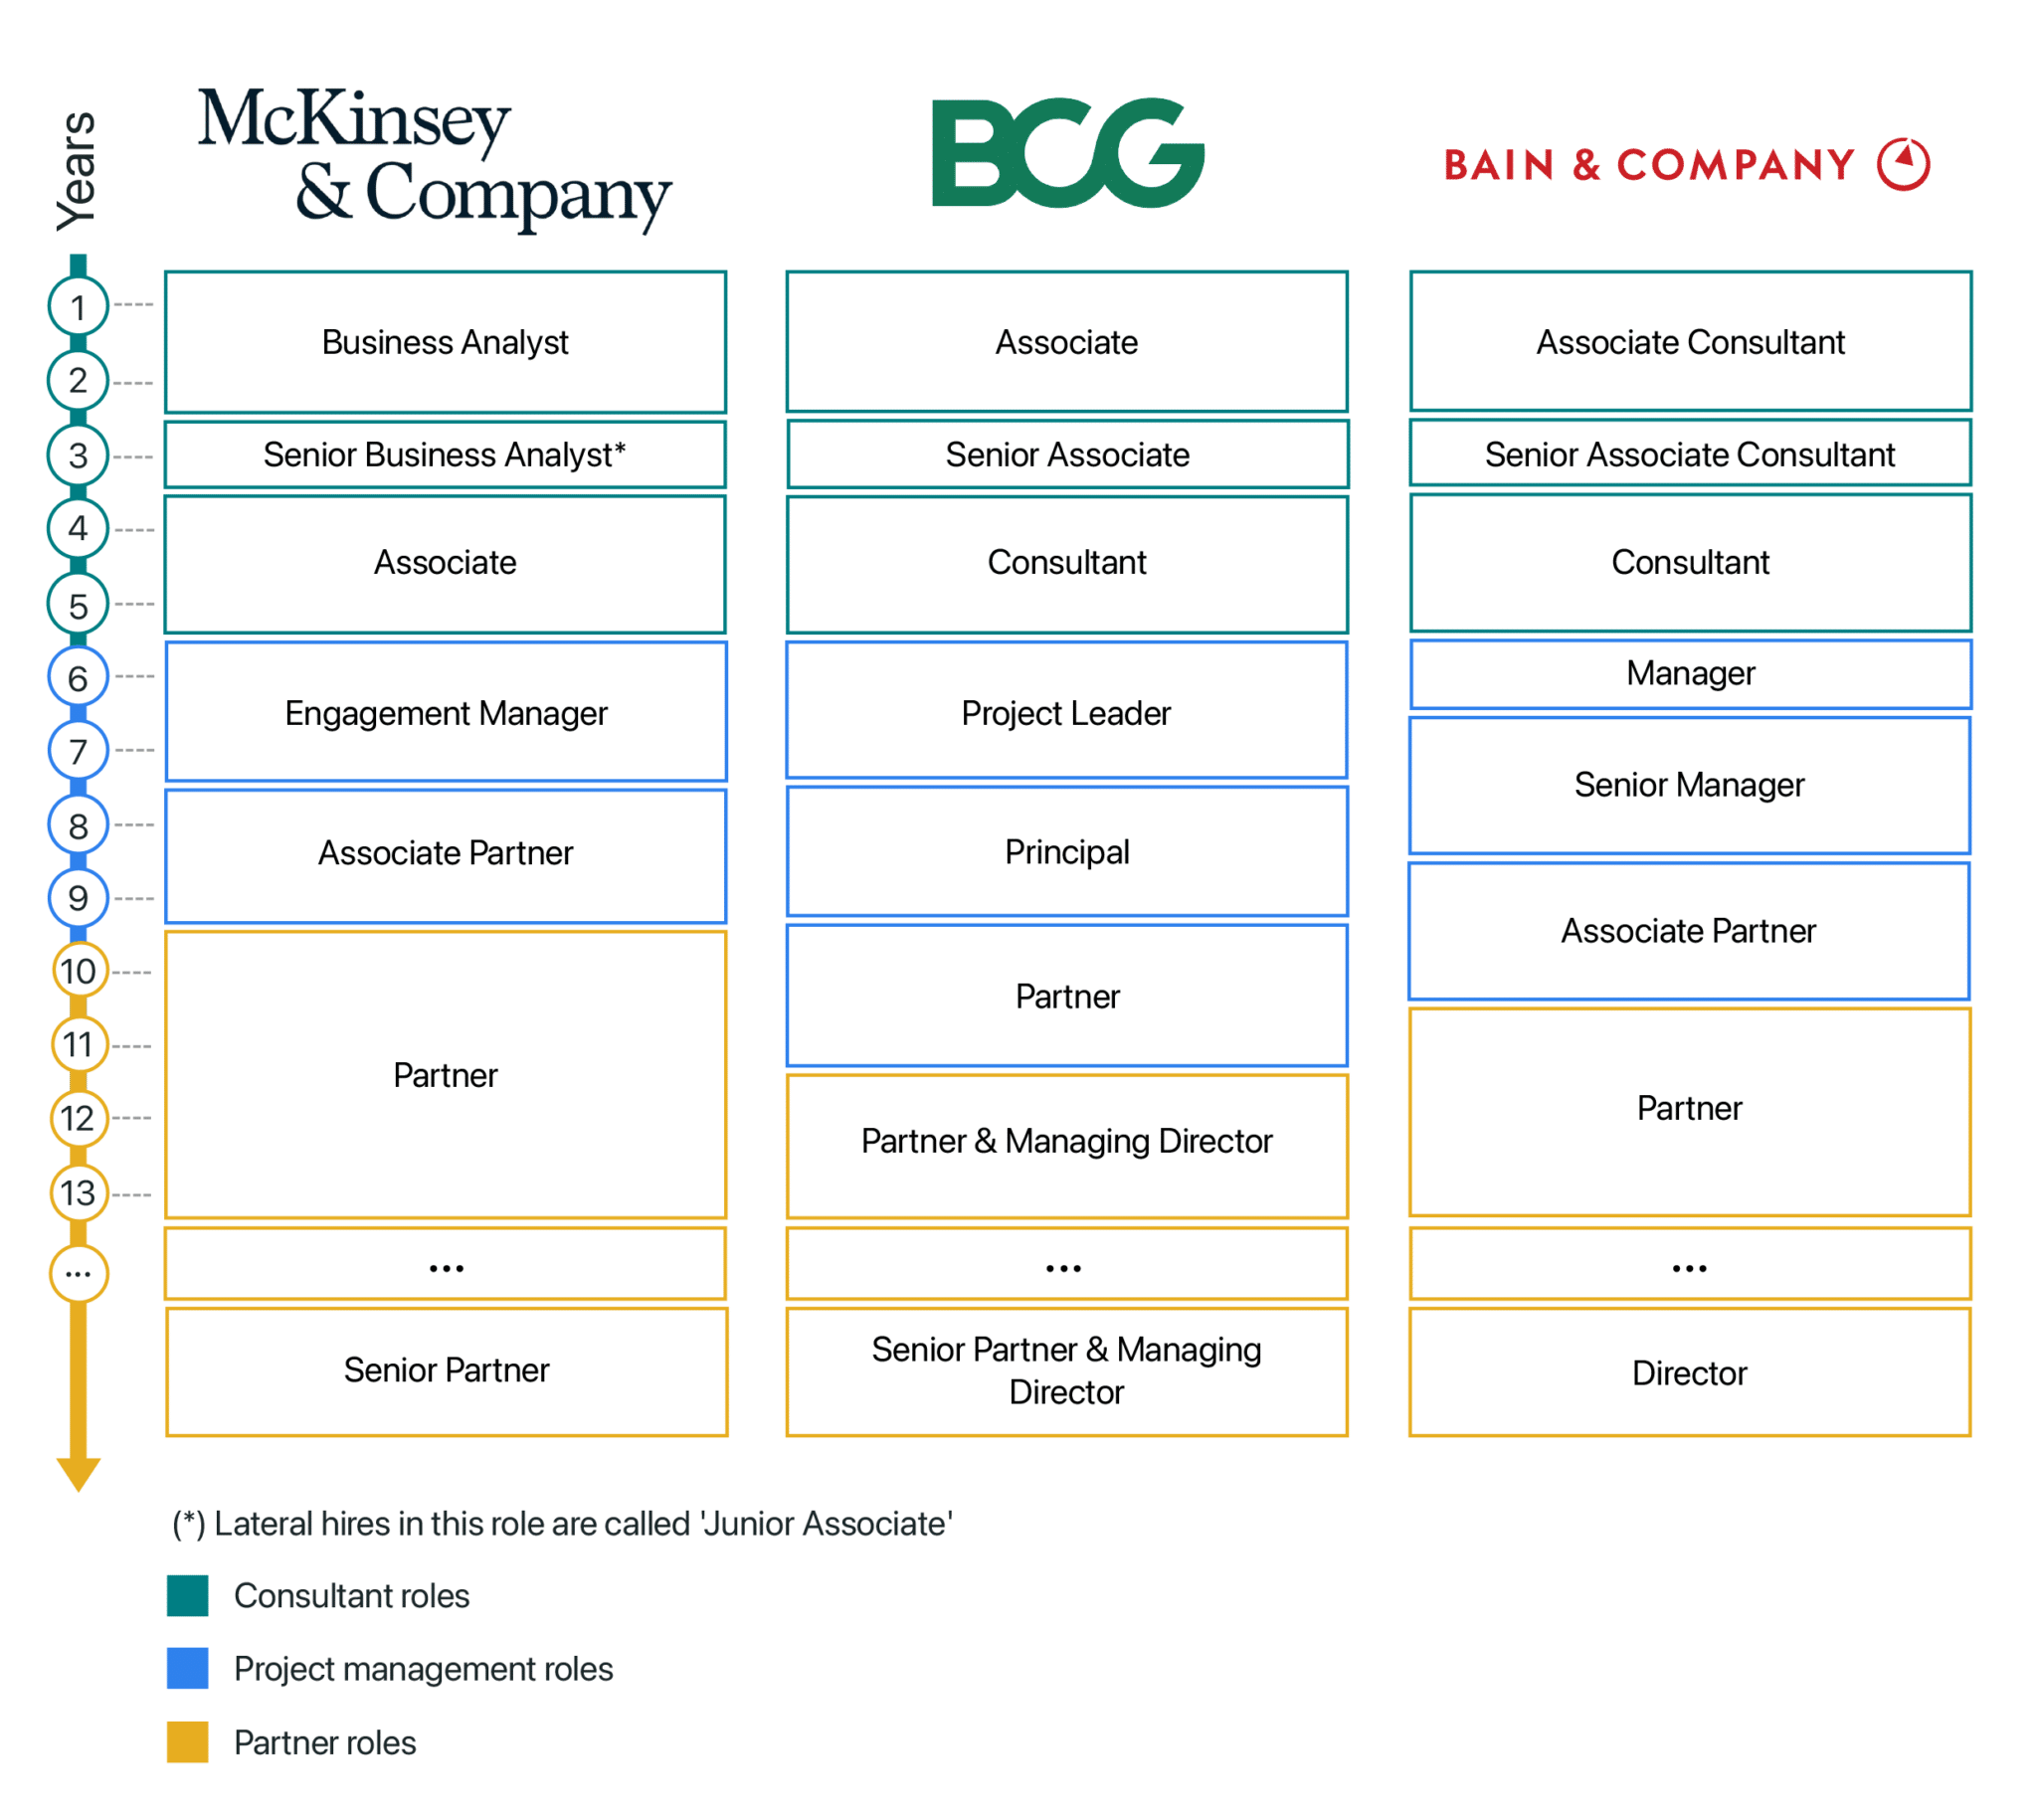 Graphic displaying consulting career path at McKinsey, BCG and Bain